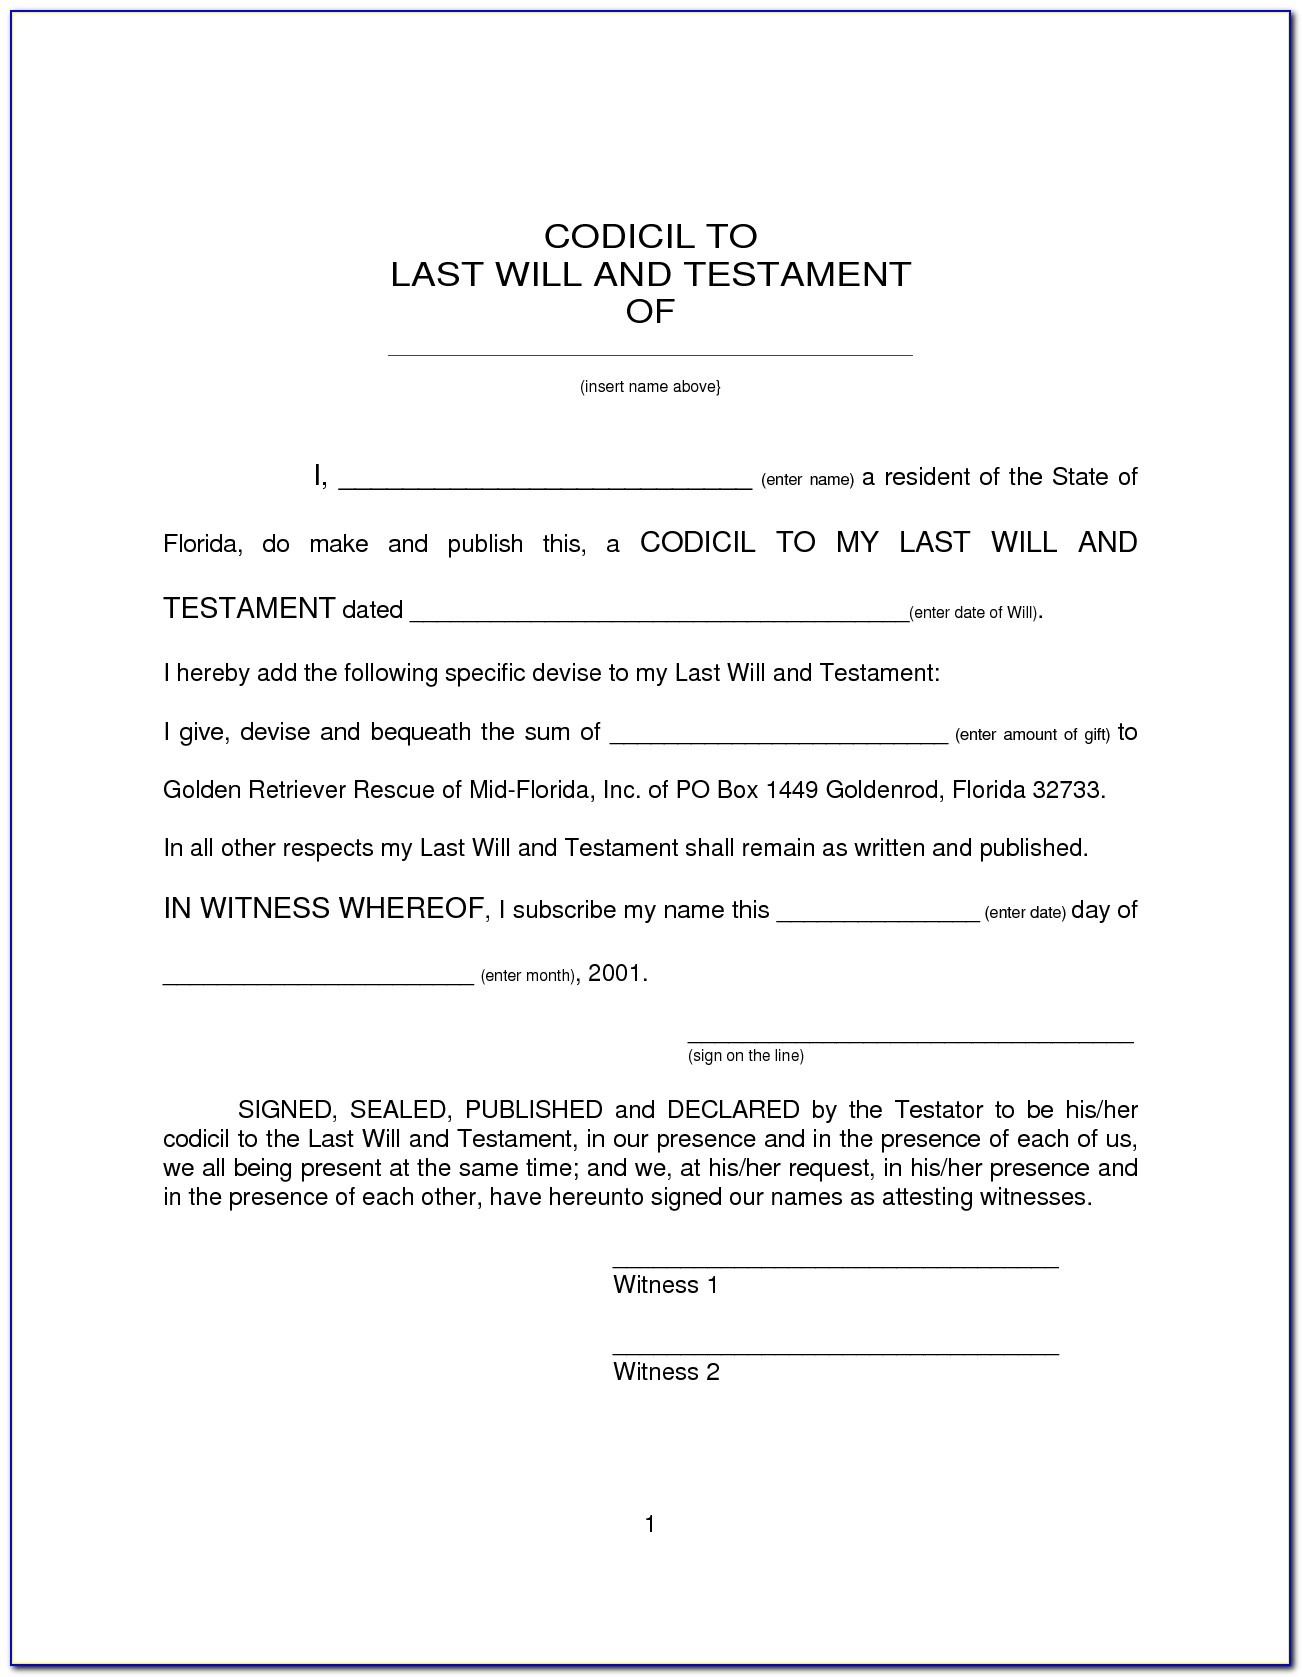 Last Will And Testament Template (6) | Best Agenda Templates Within - Free Printable Last Will And Testament Blank Forms Florida